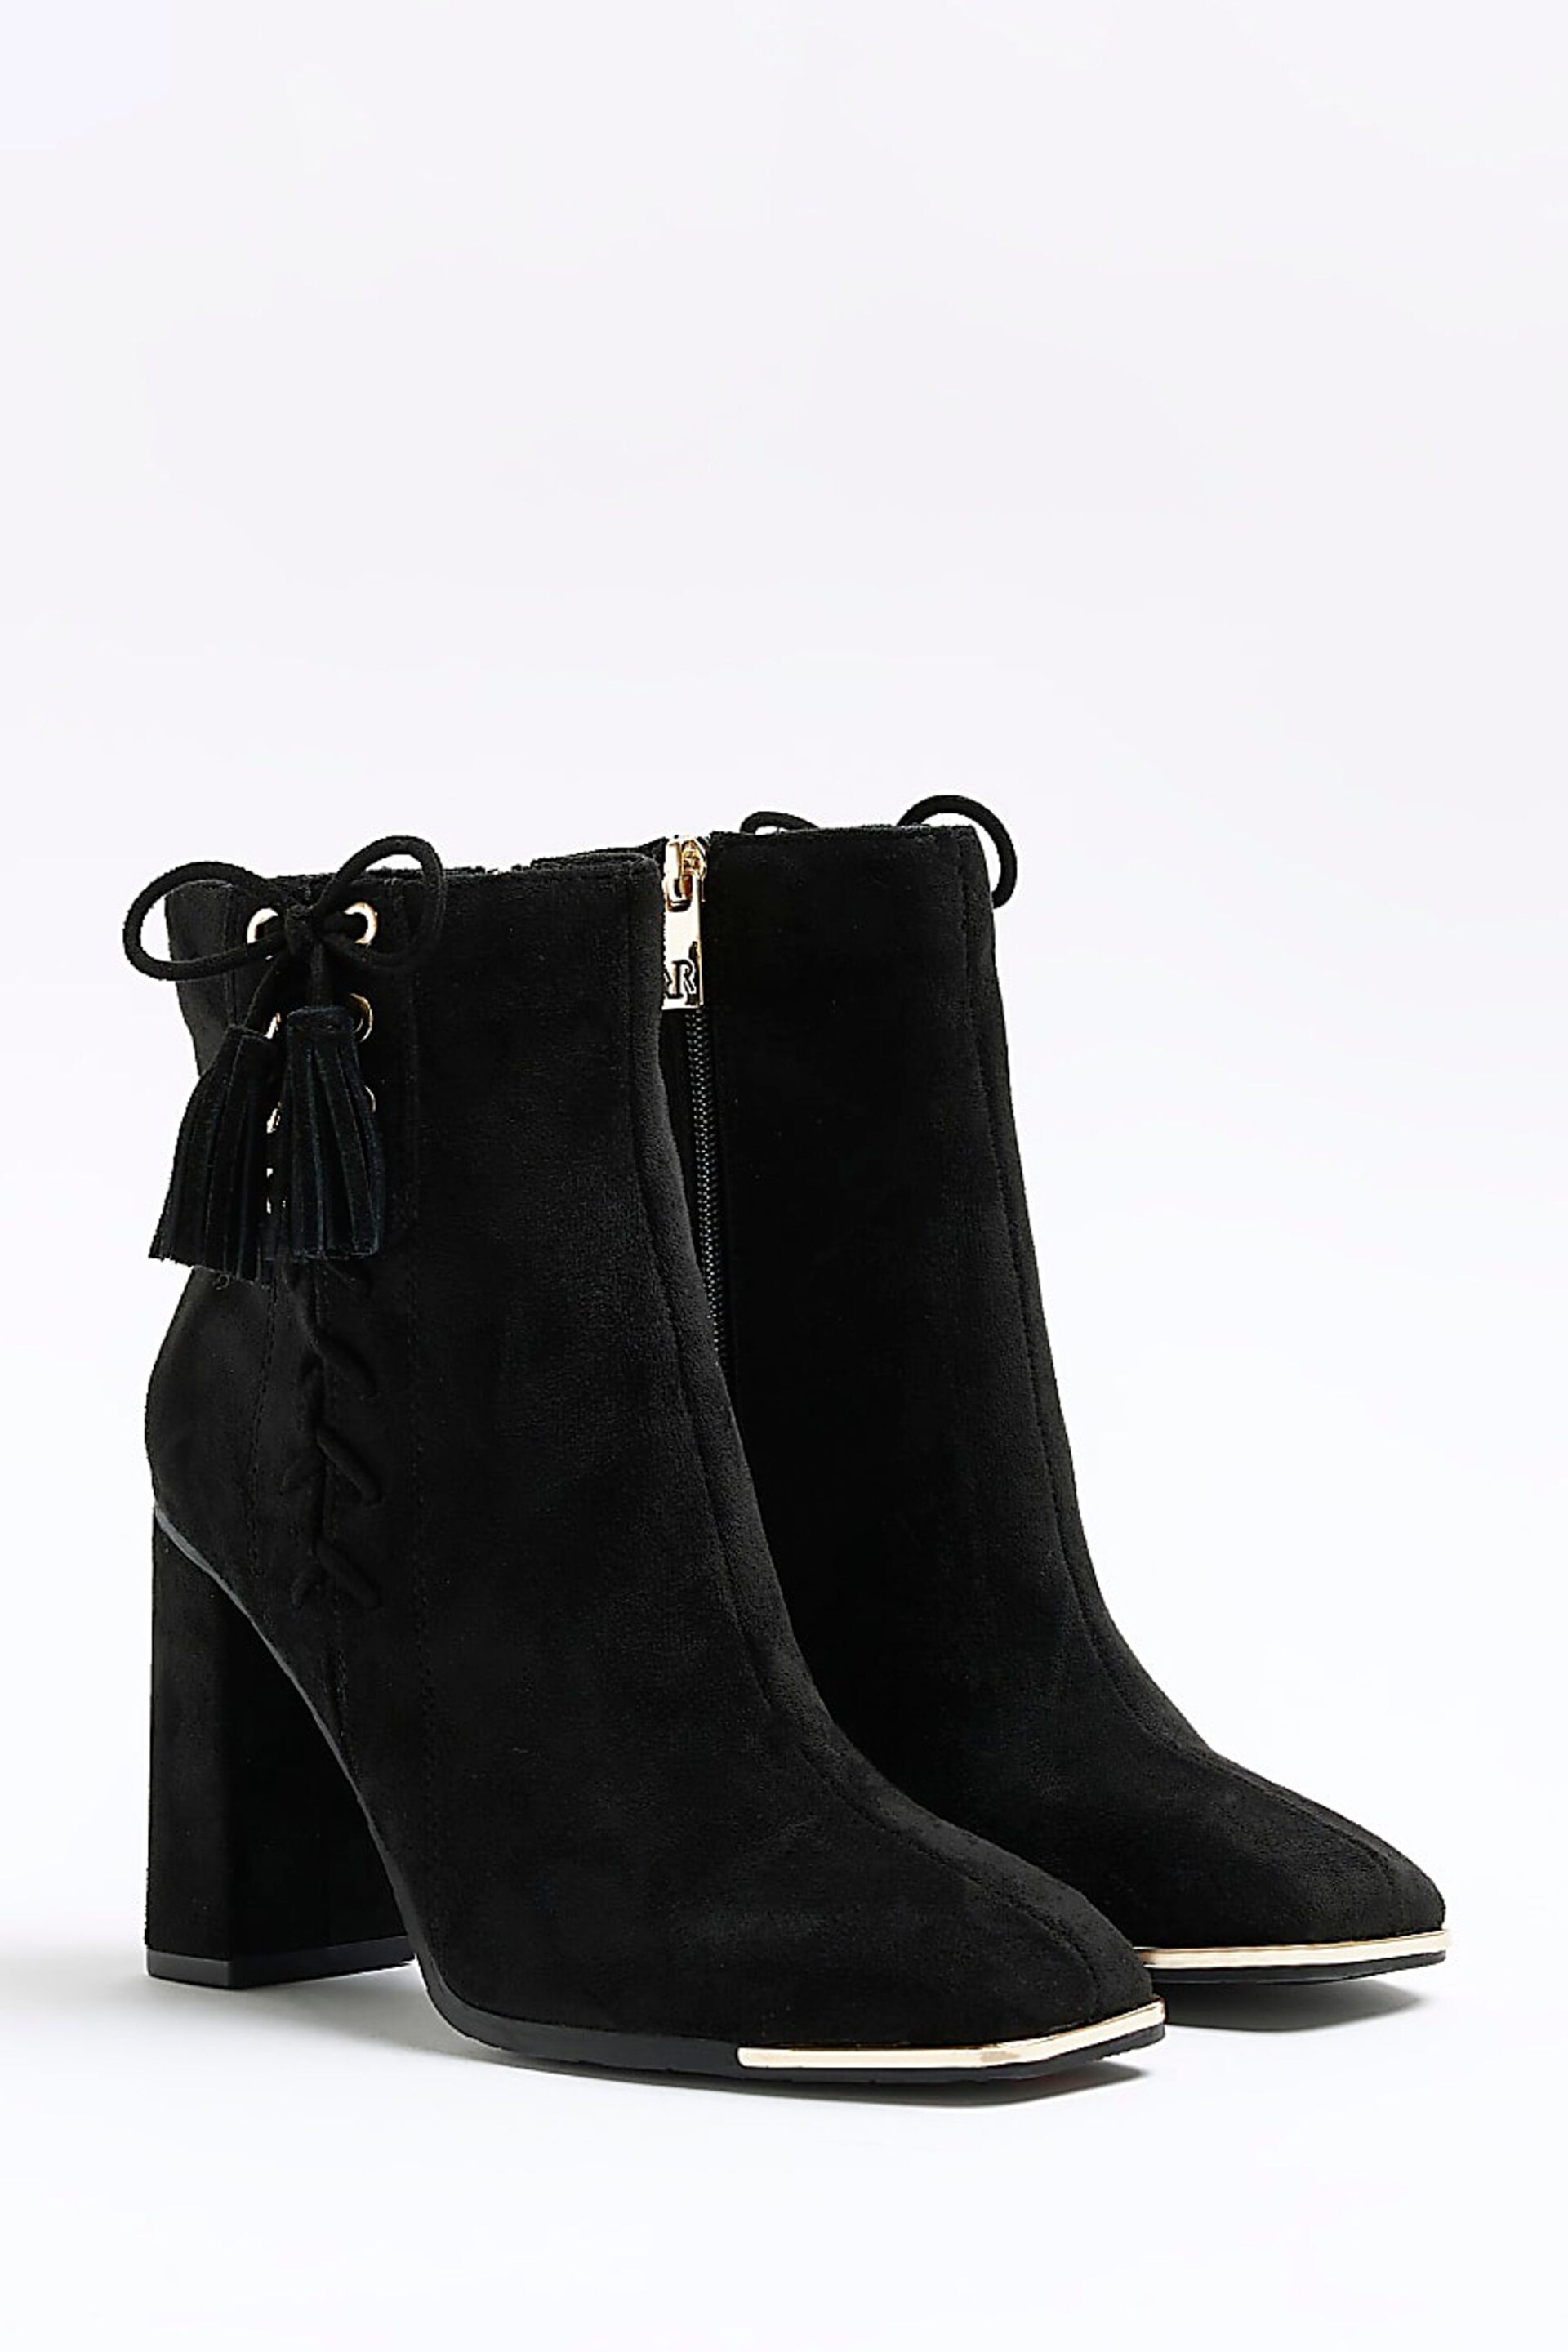 River Island Black Lace Up Corset Boots - Image 2 of 6